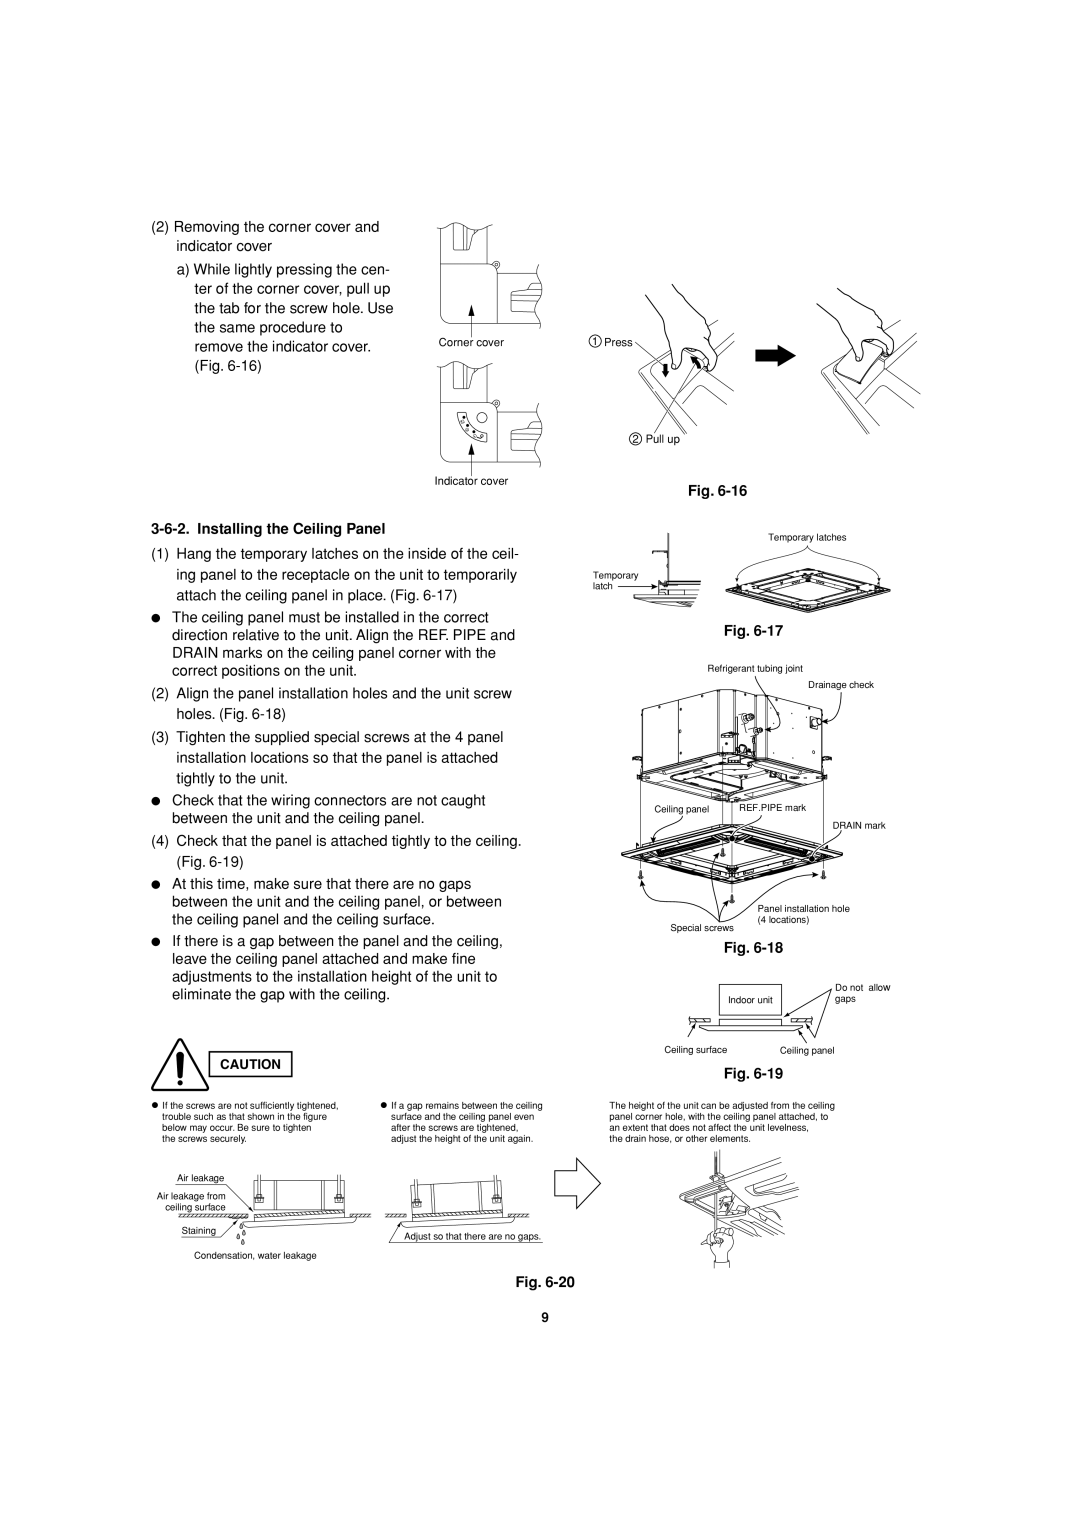 Sanyo XMHS0972, XMHS1272 service manual Fig, Installing the Ceiling Panel 